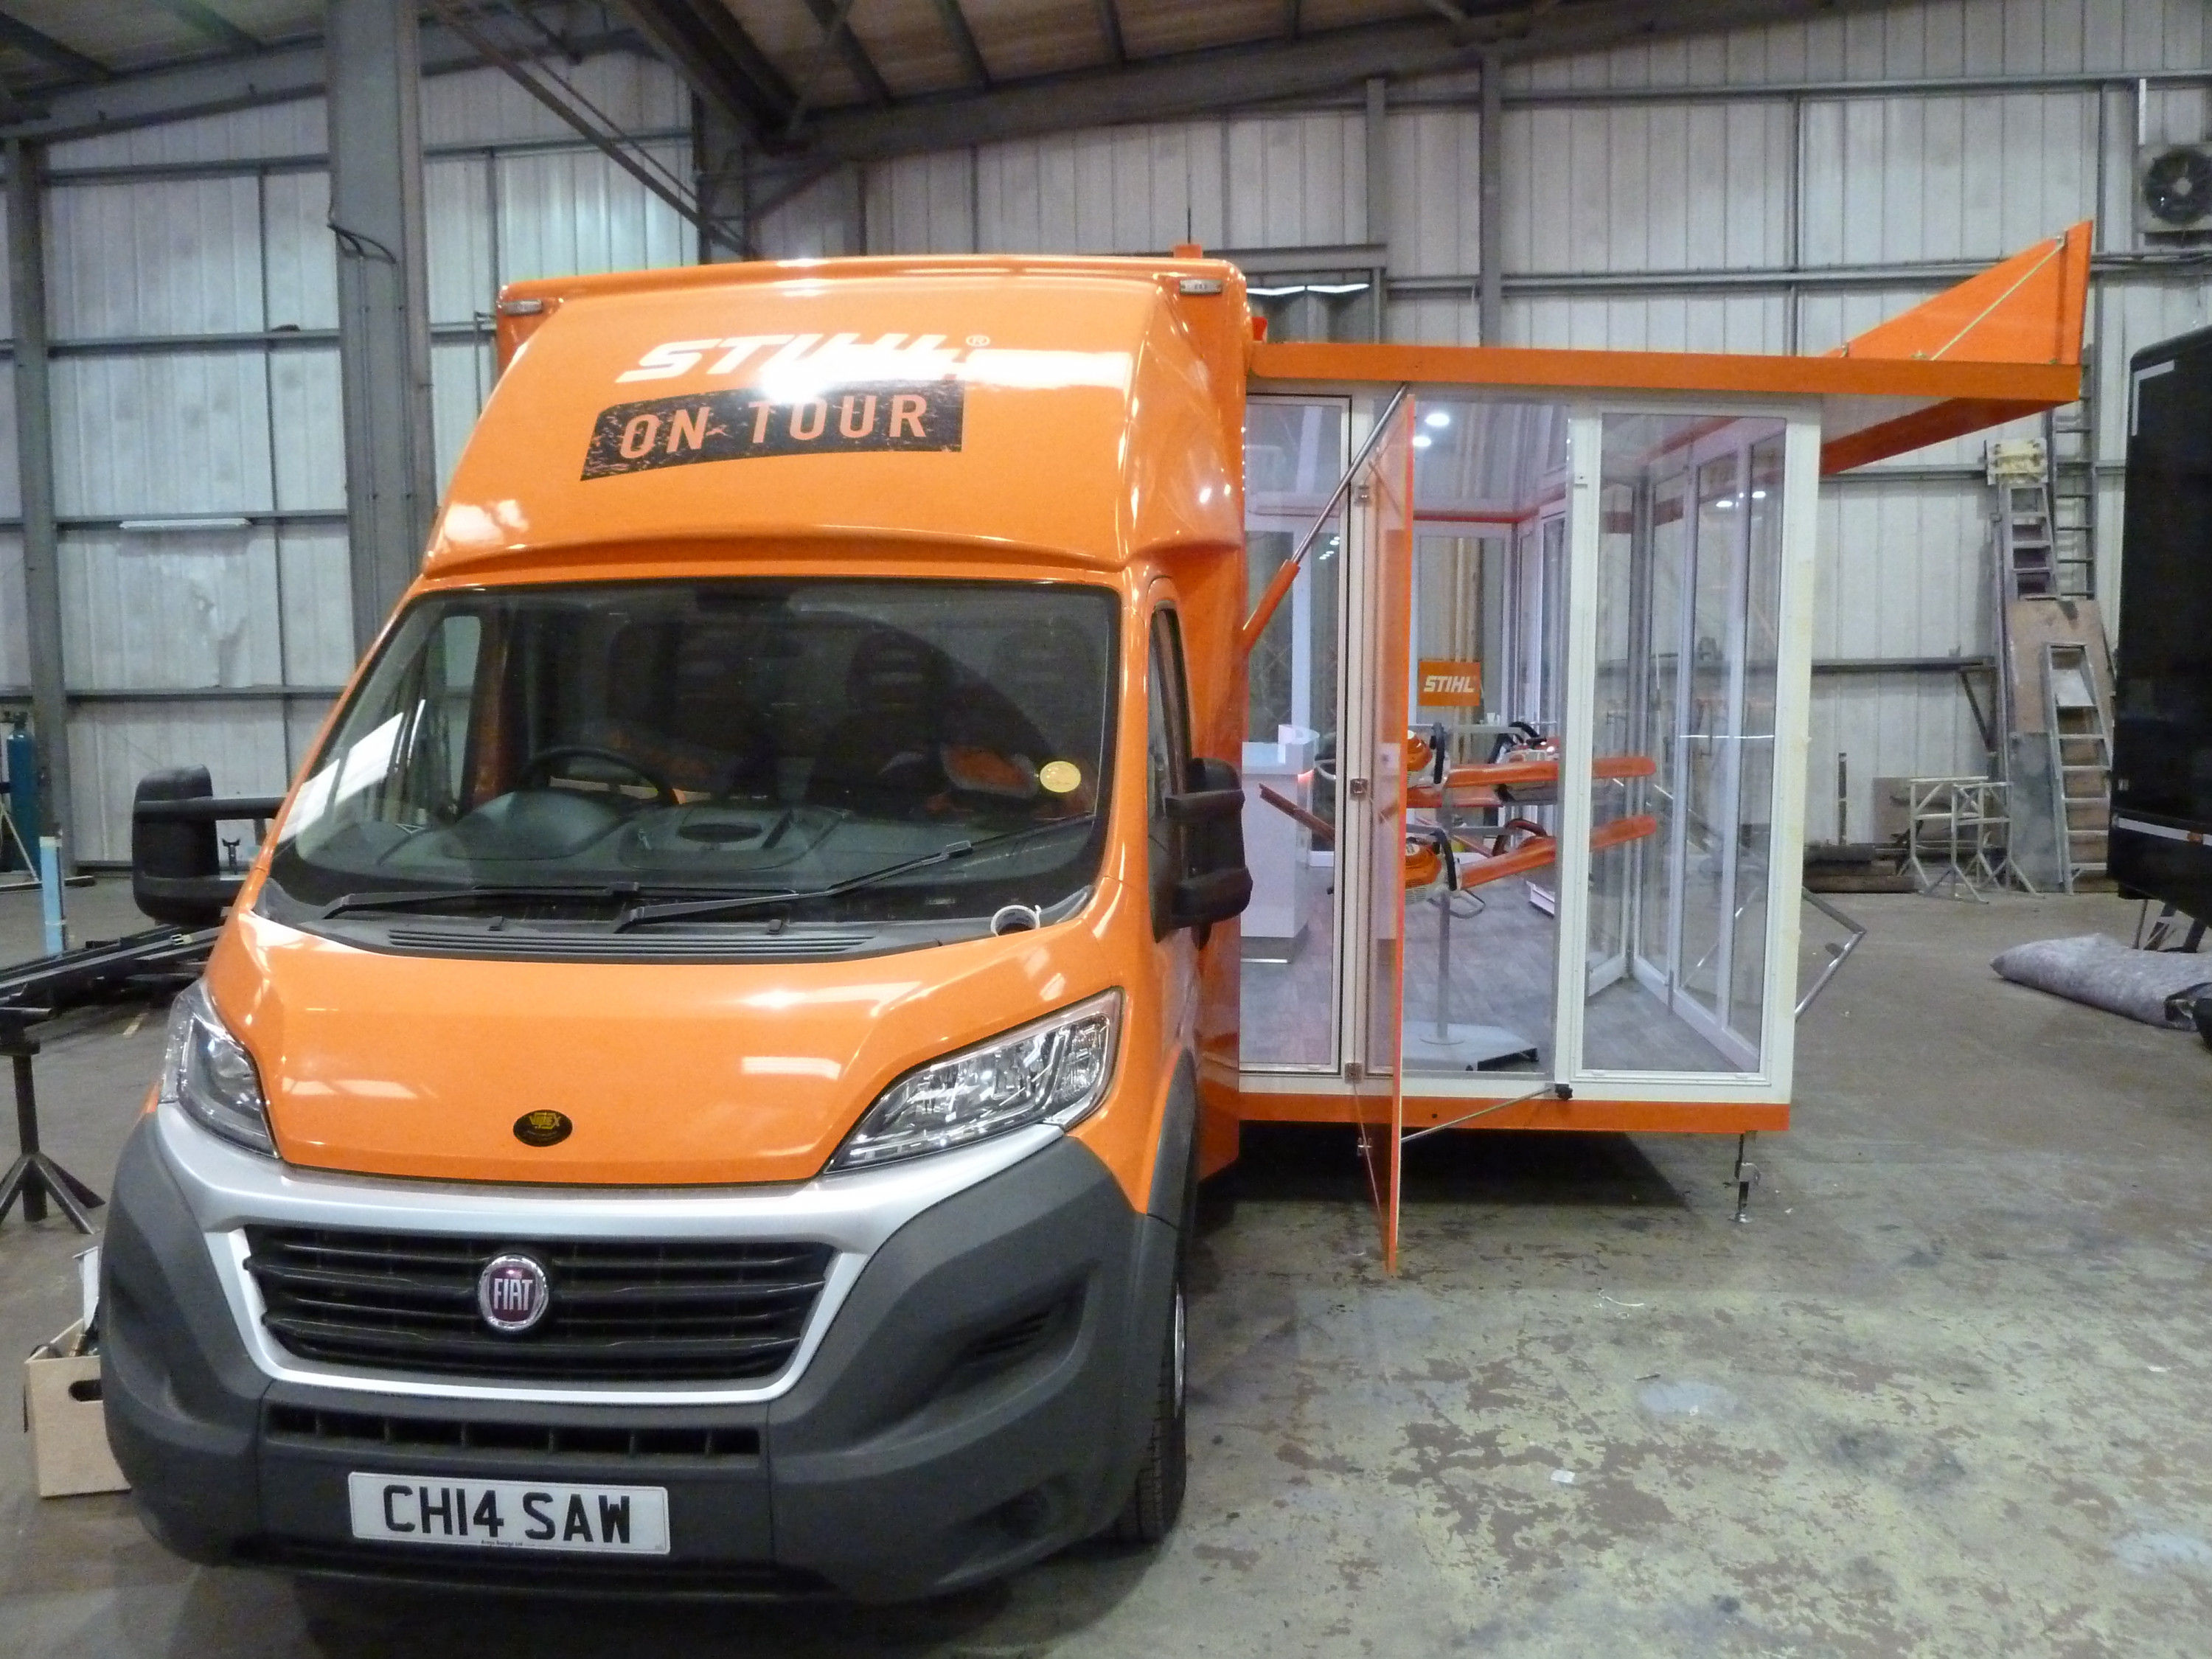 Stihl exhibition unit deployed front view